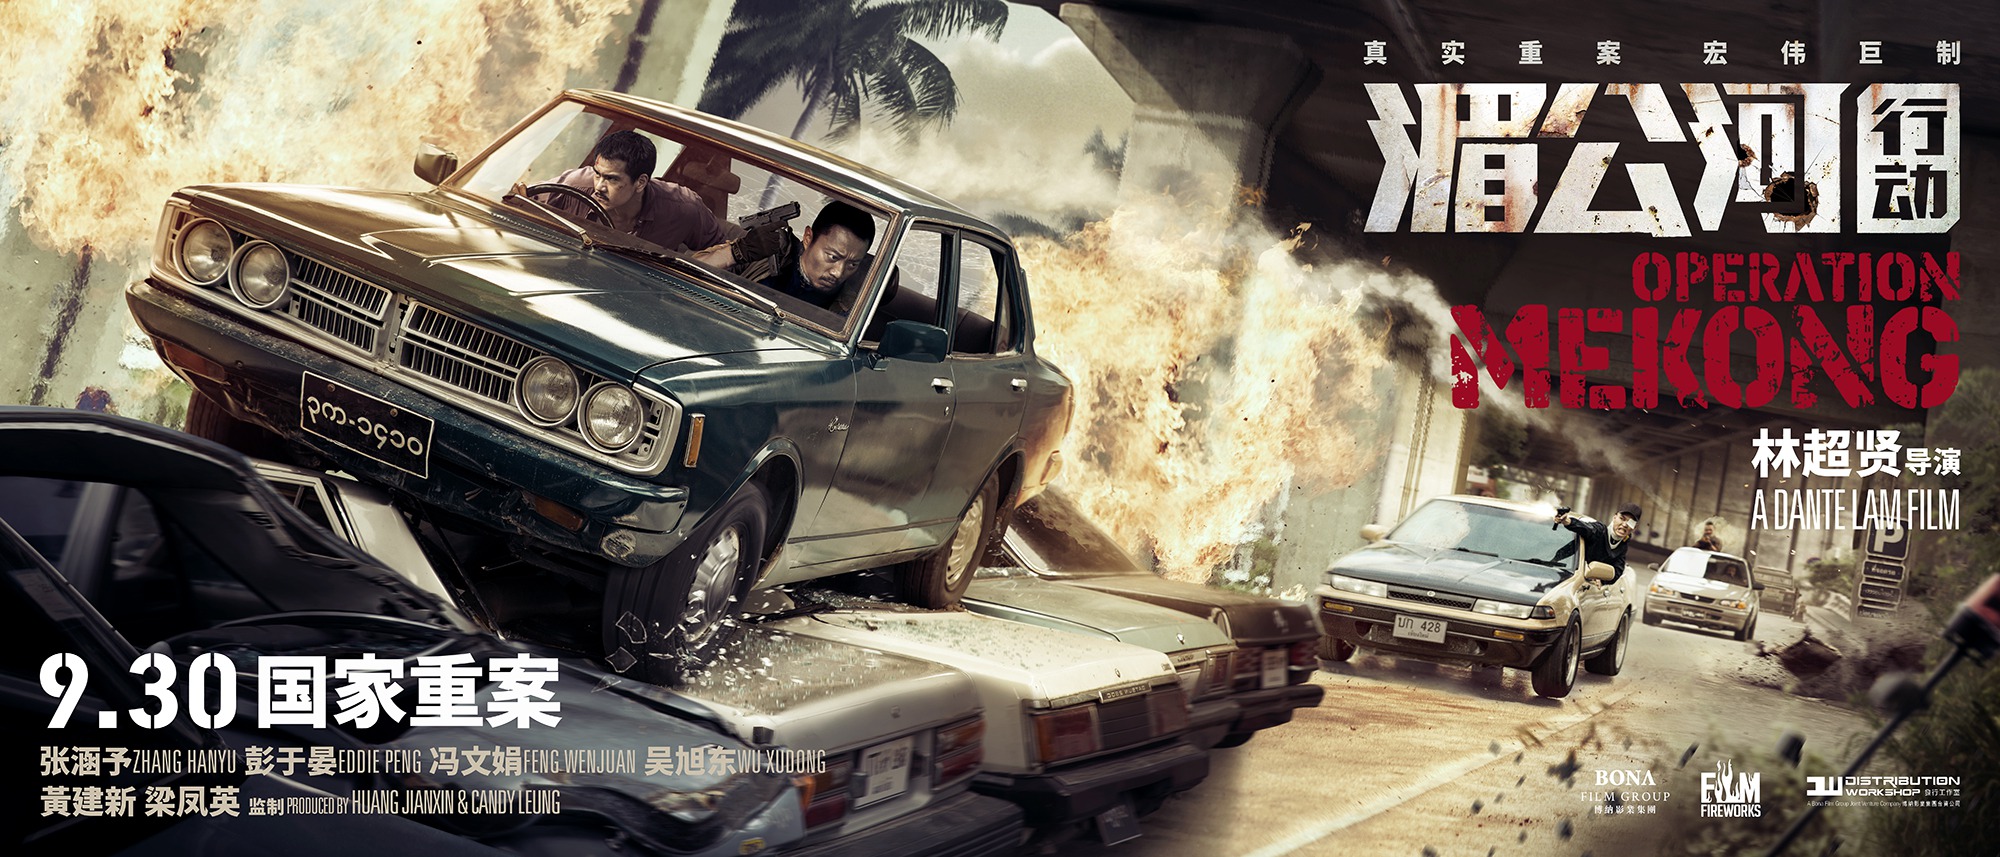 Mega Sized Movie Poster Image for Mei Gong he xing dong (#1 of 8)